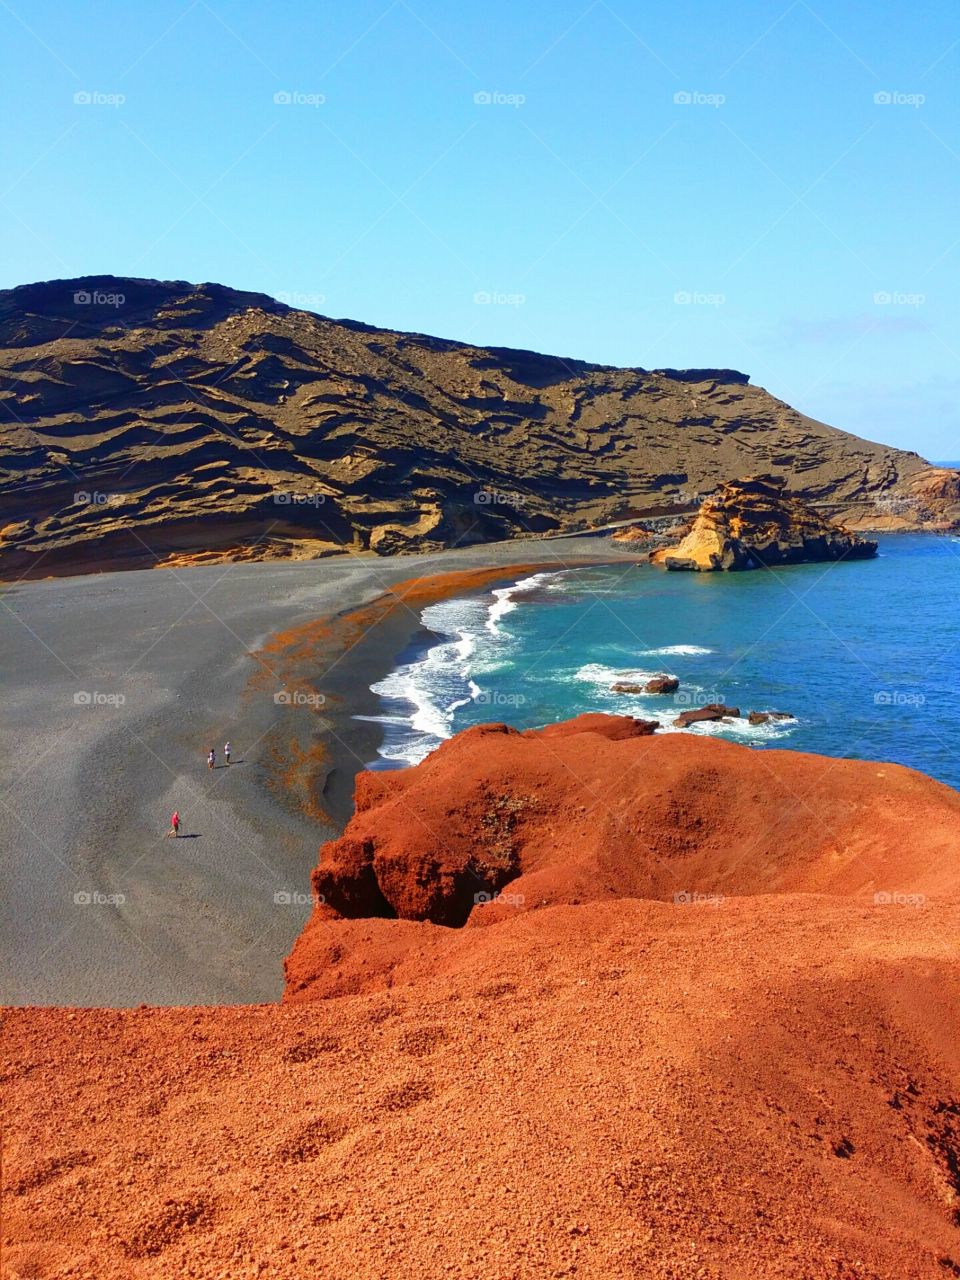 The bay used in many films. Lanzarote.